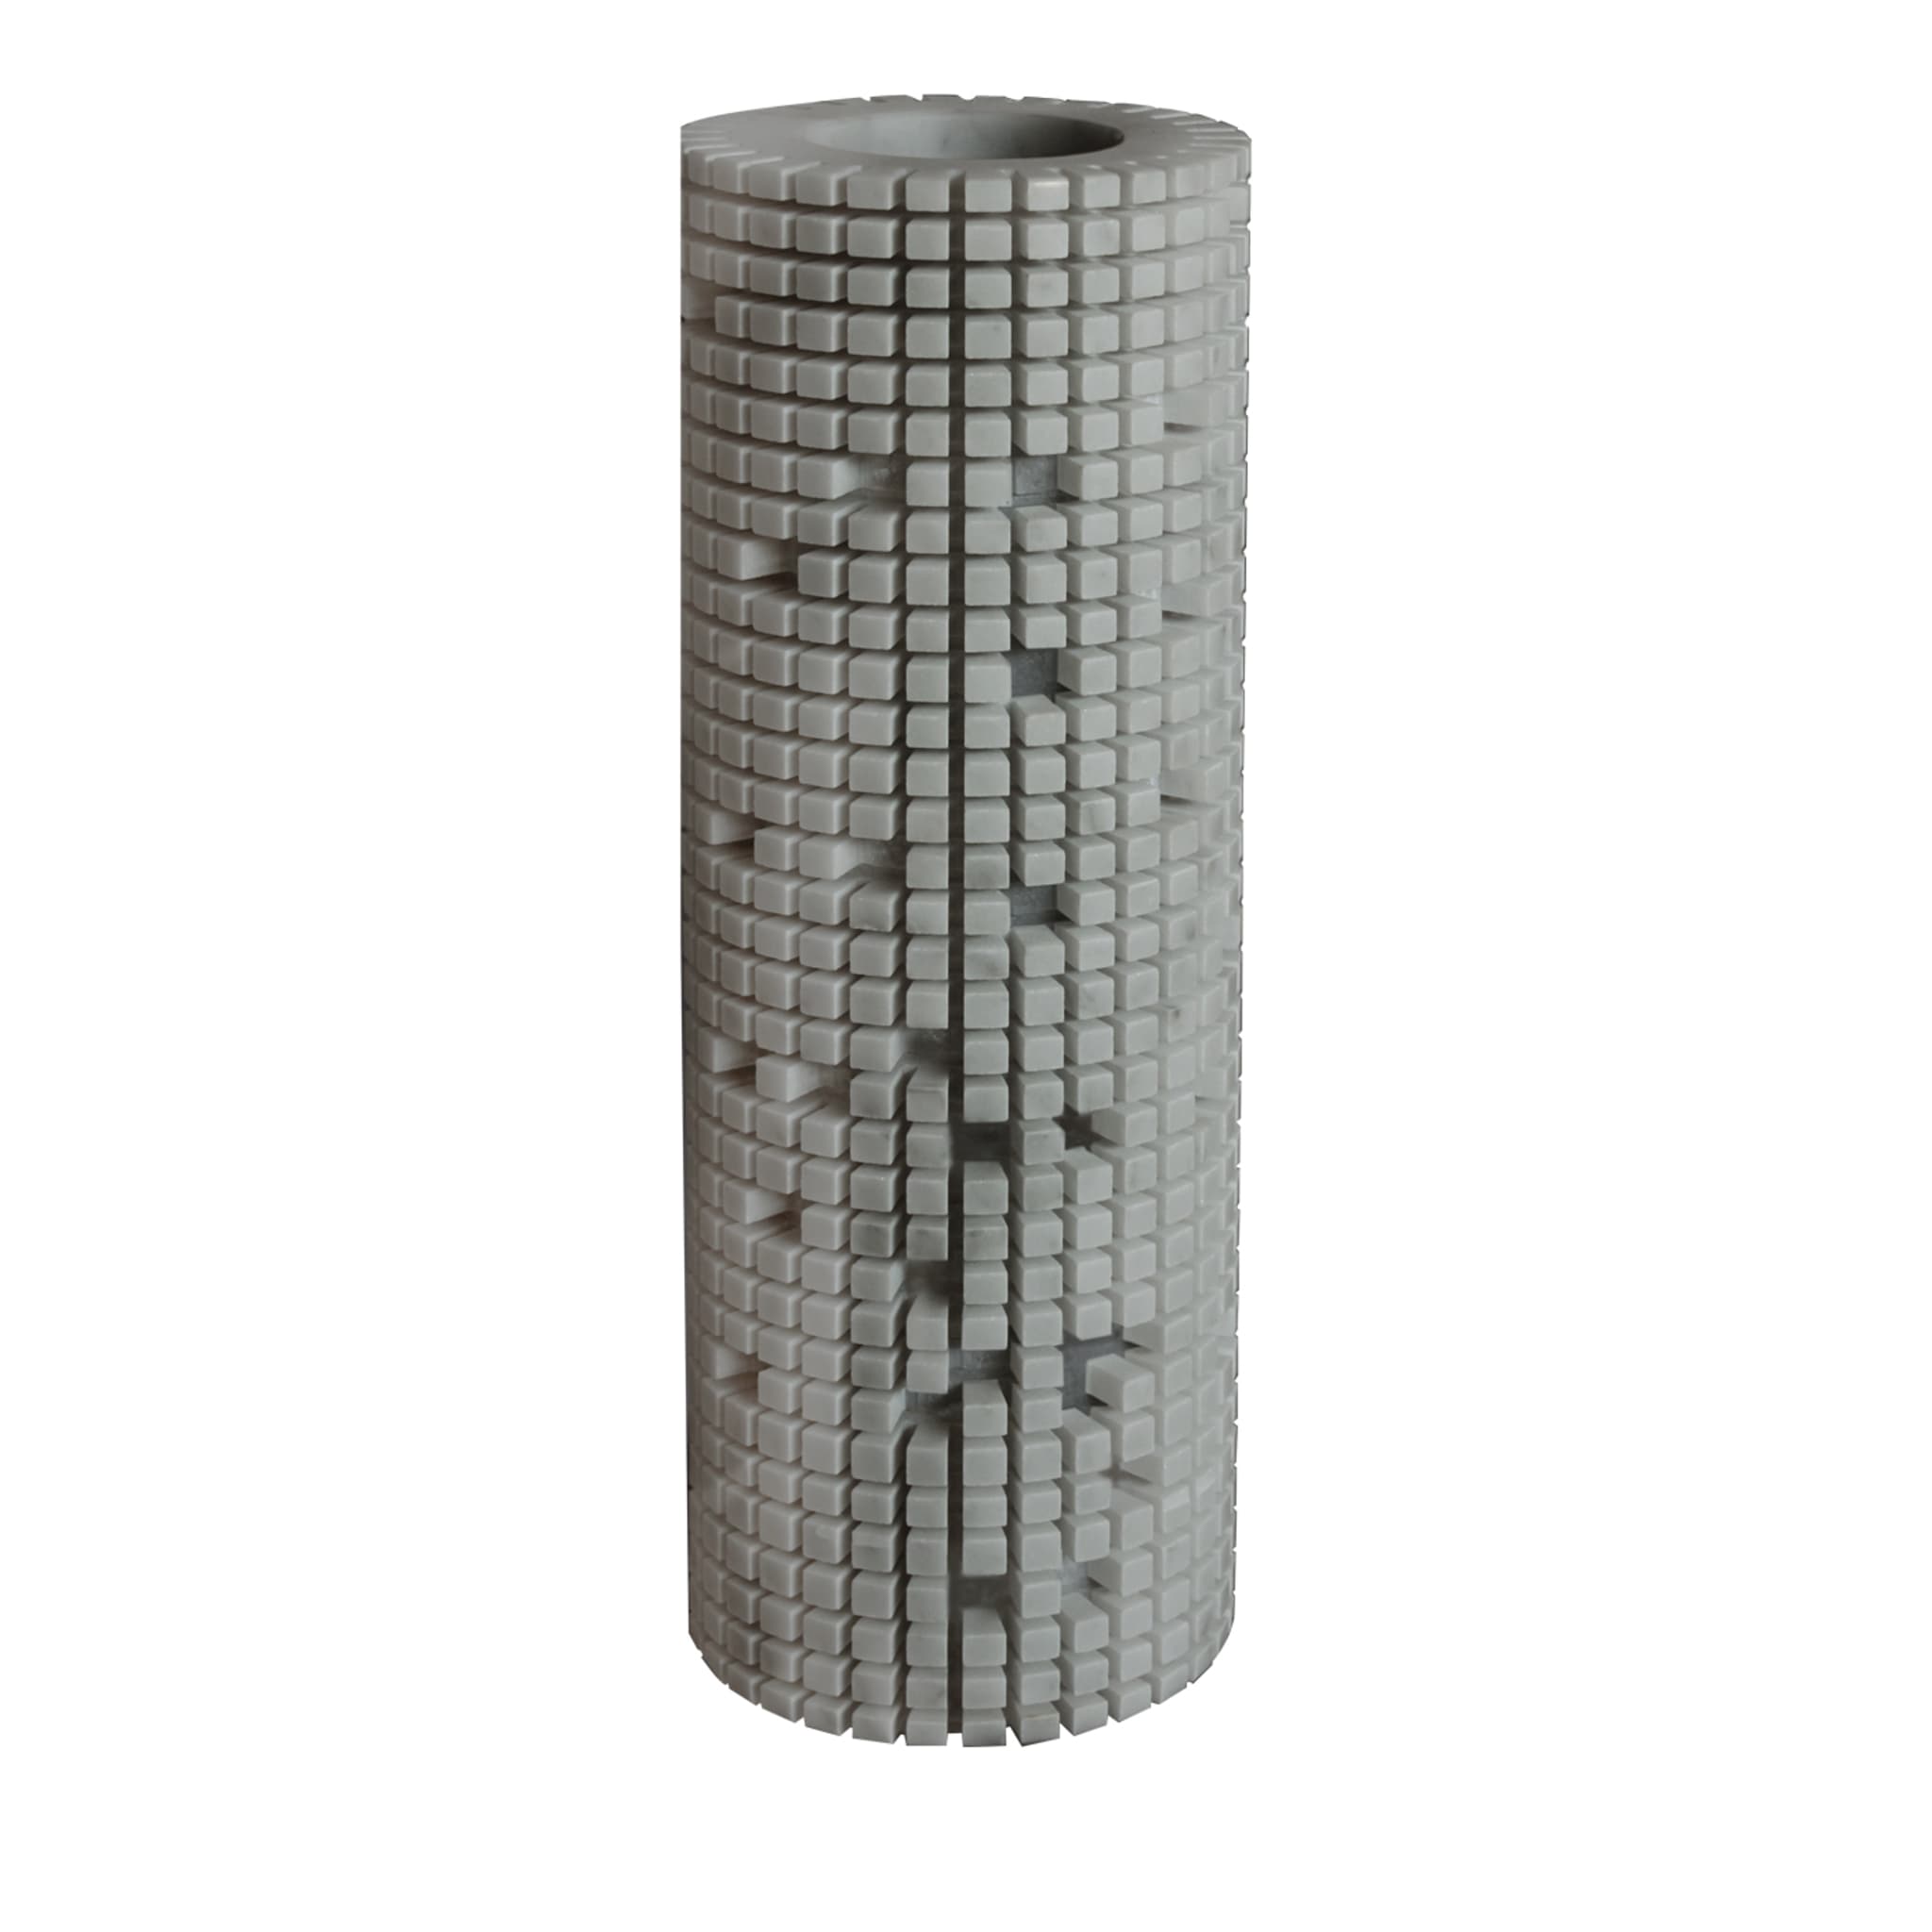 Pixel Tall Vase by Paolo Ulian - Main view